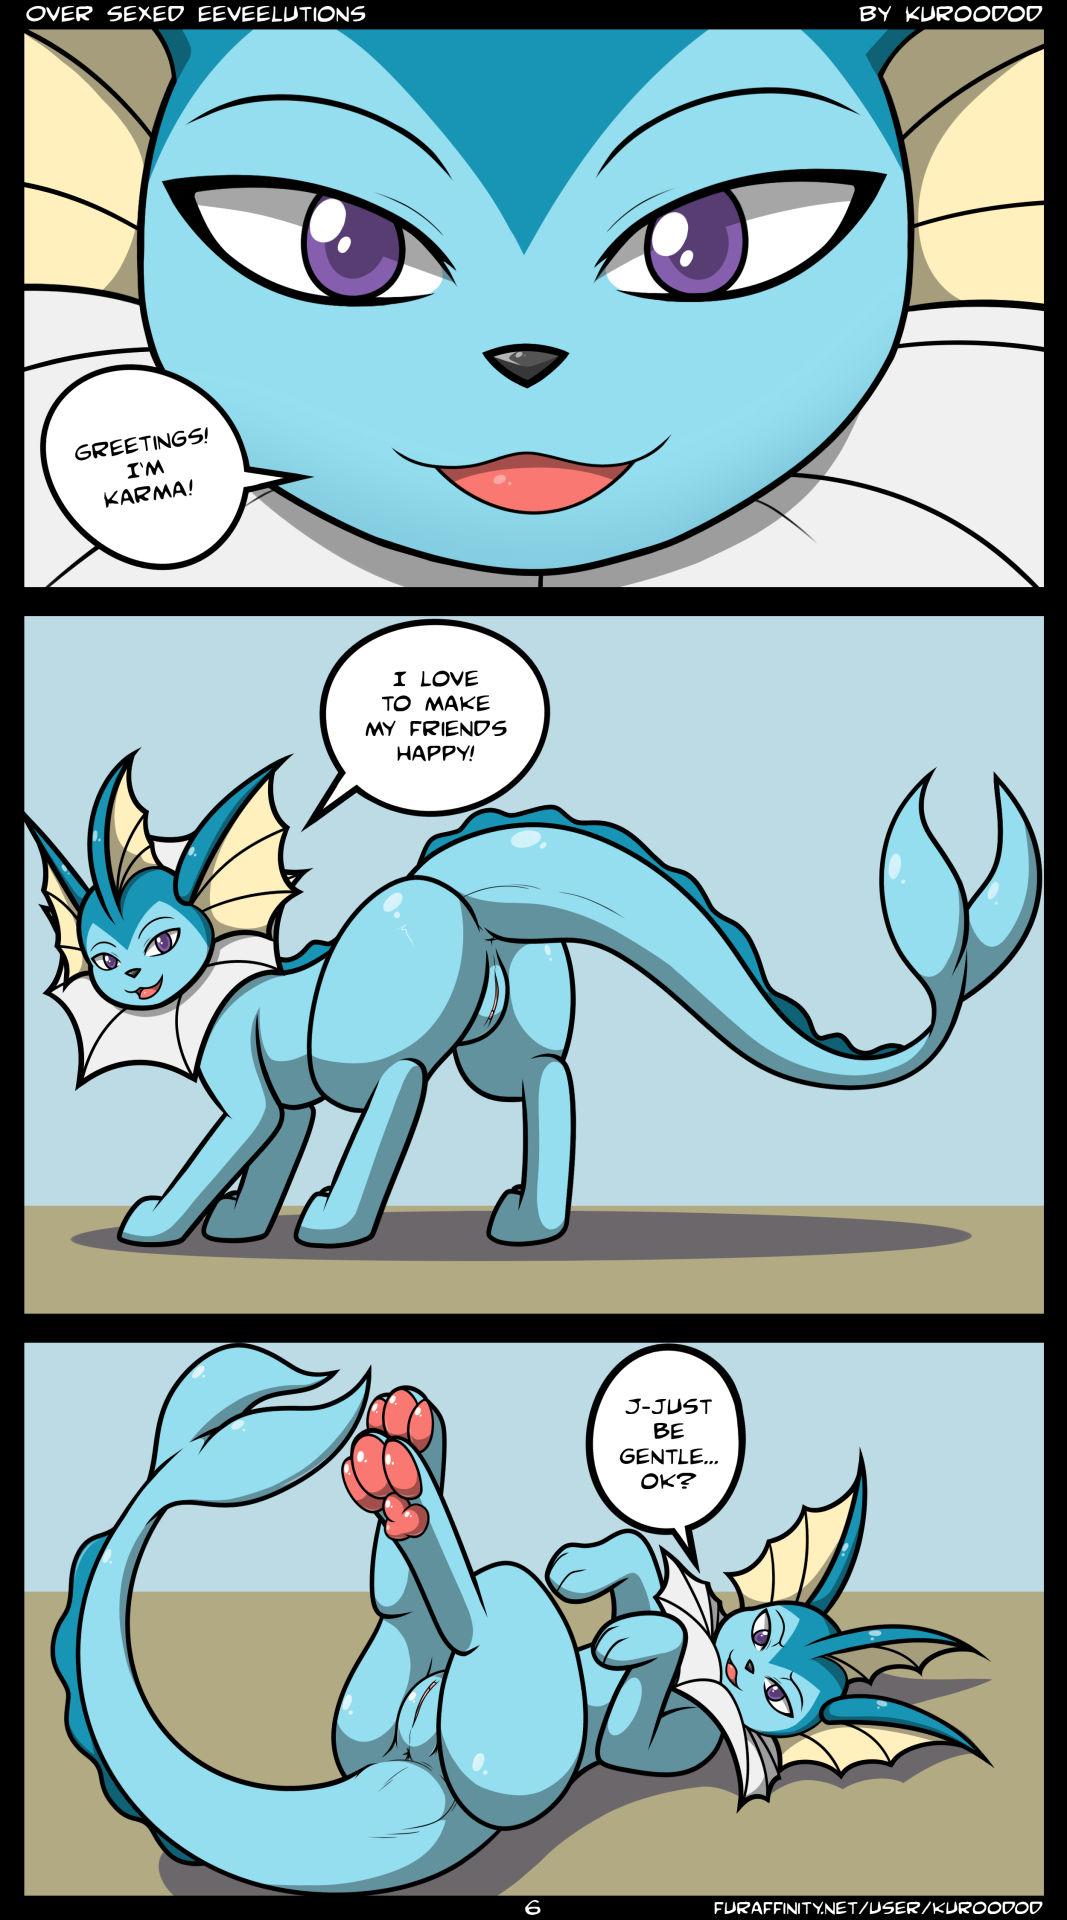 Over Sexed Eeveelutions 6 by kuroodod . It&rsquo;s a good morning for another